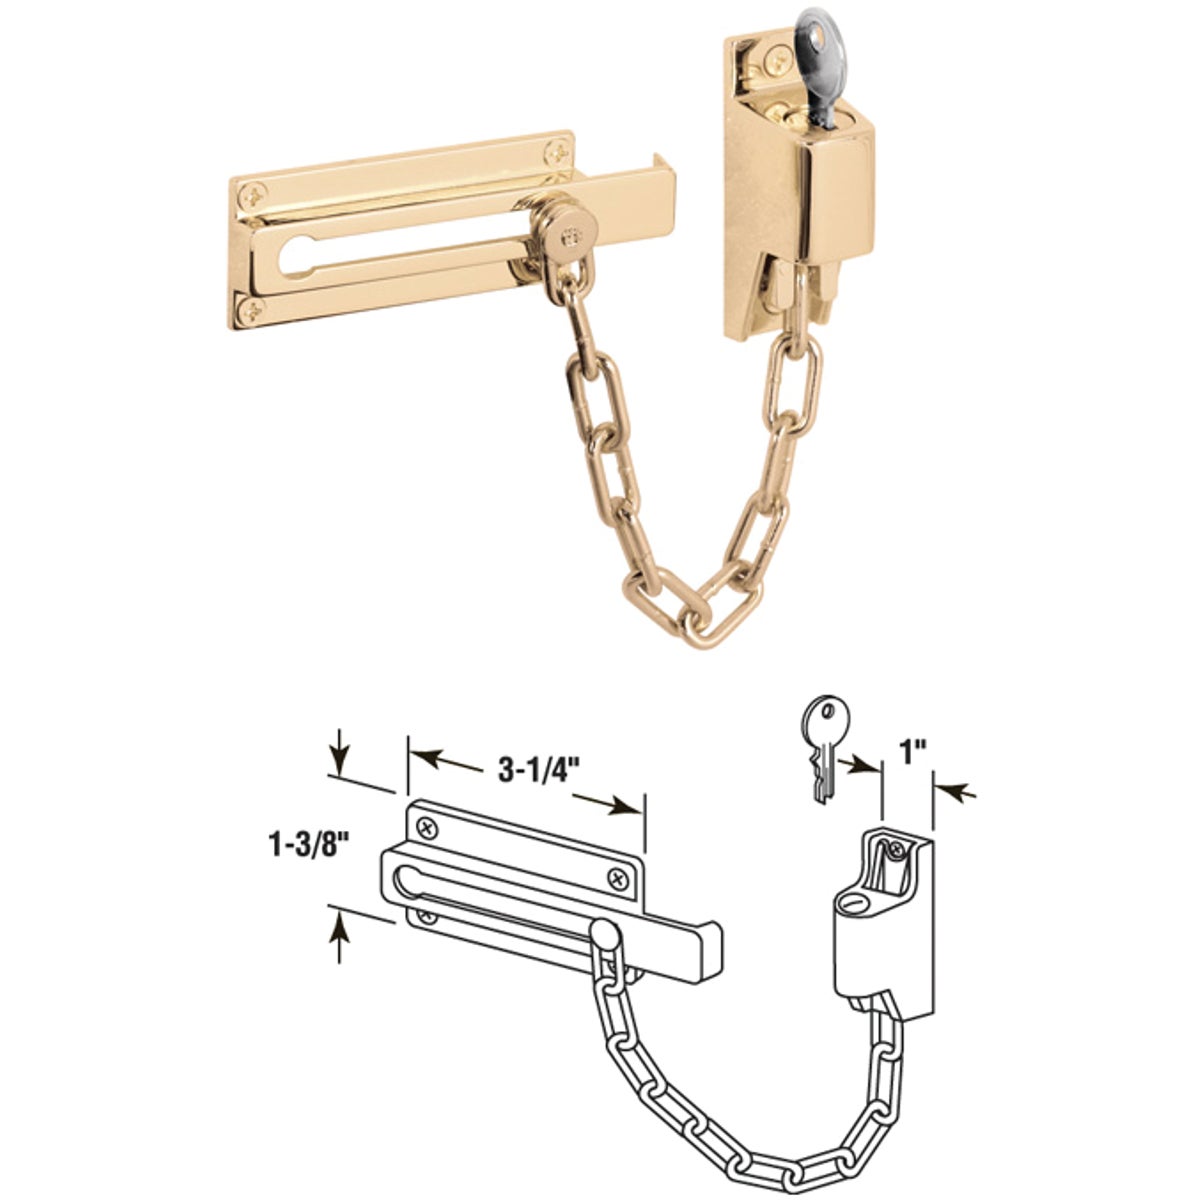 Item 219215, Plated steel chain and Diecast keeper provides increased security while 